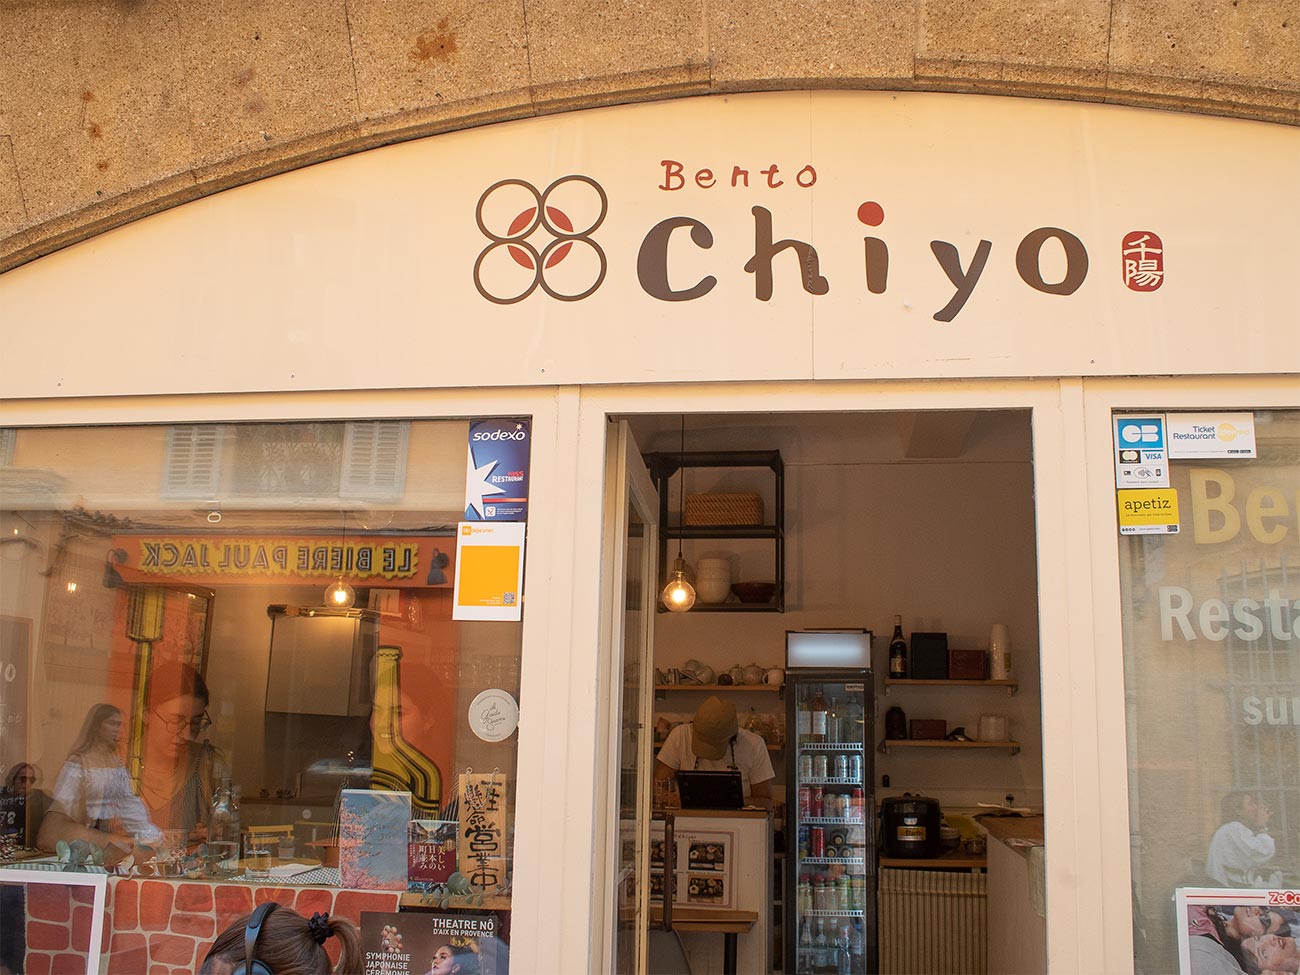 Bento Chiyo - Japanese canteen in Aix en Provence - City Guide Love Spots (front)